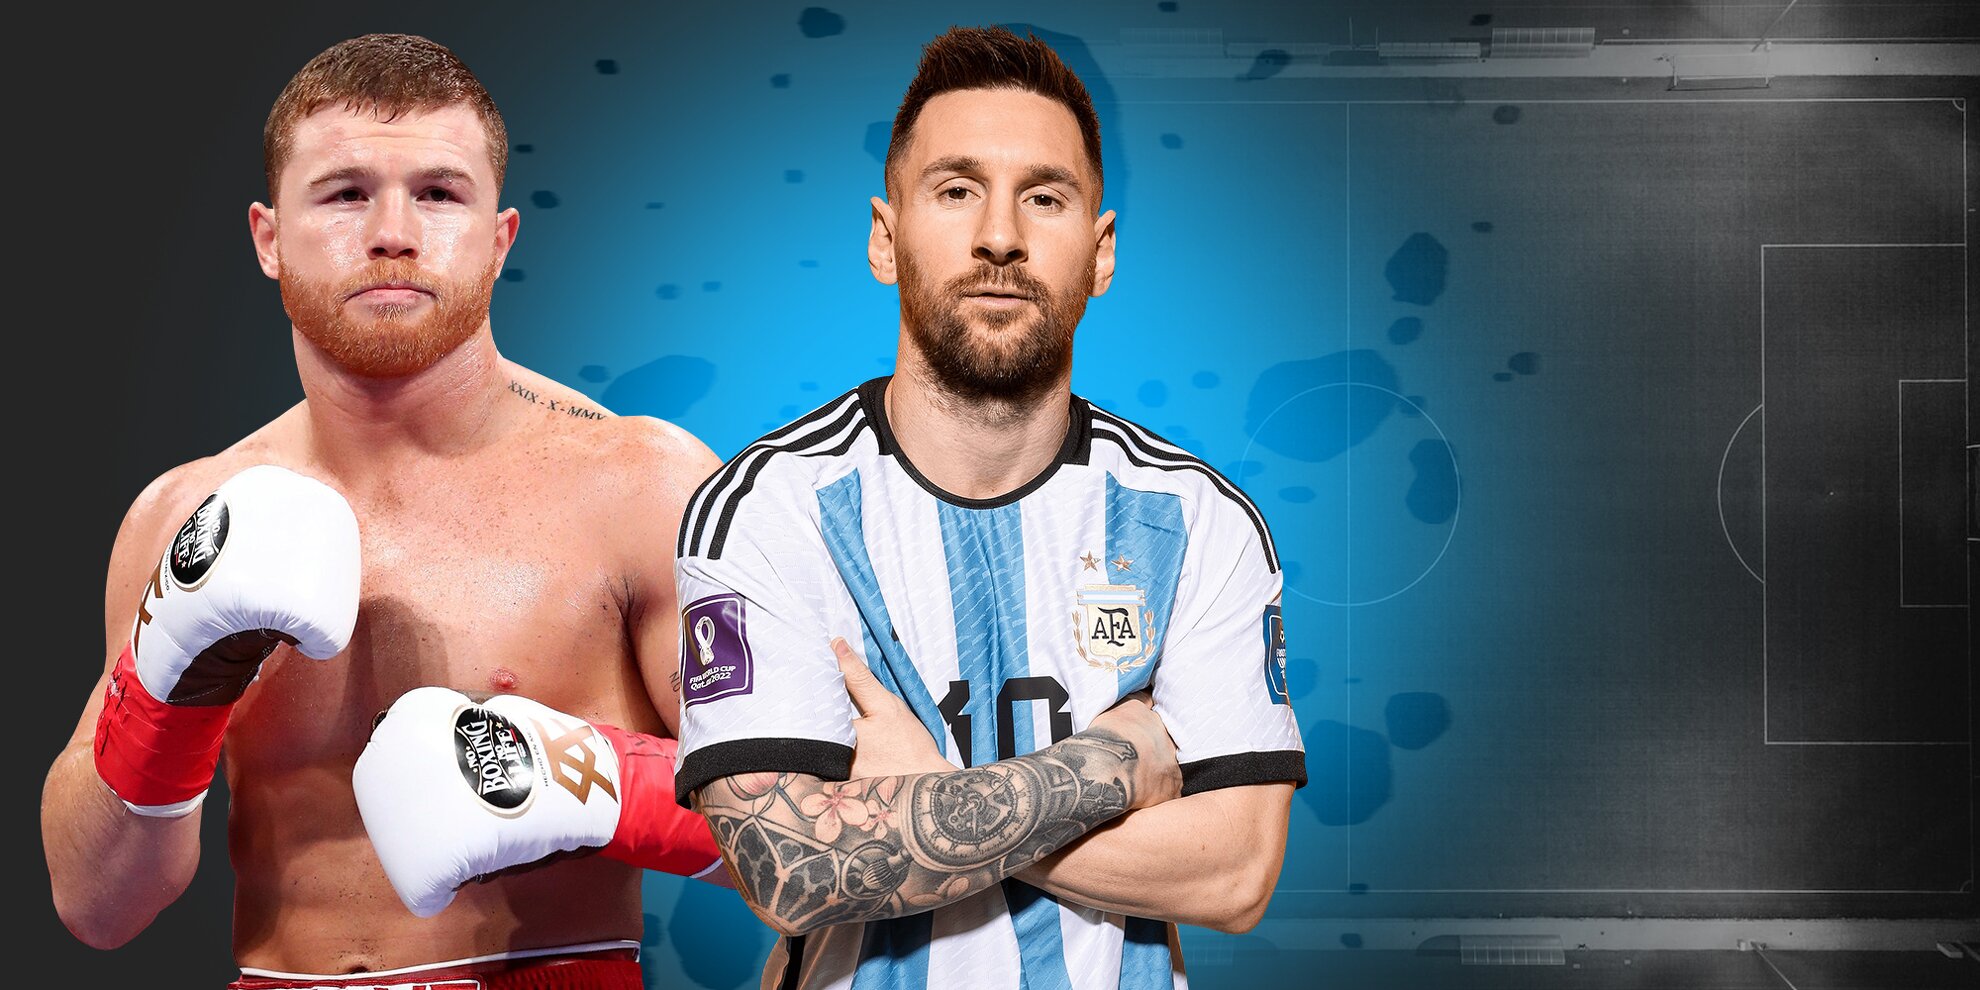 Boxing World Champion Cancelo calls out Lionel Messi after Mexico's defeat against Argentina